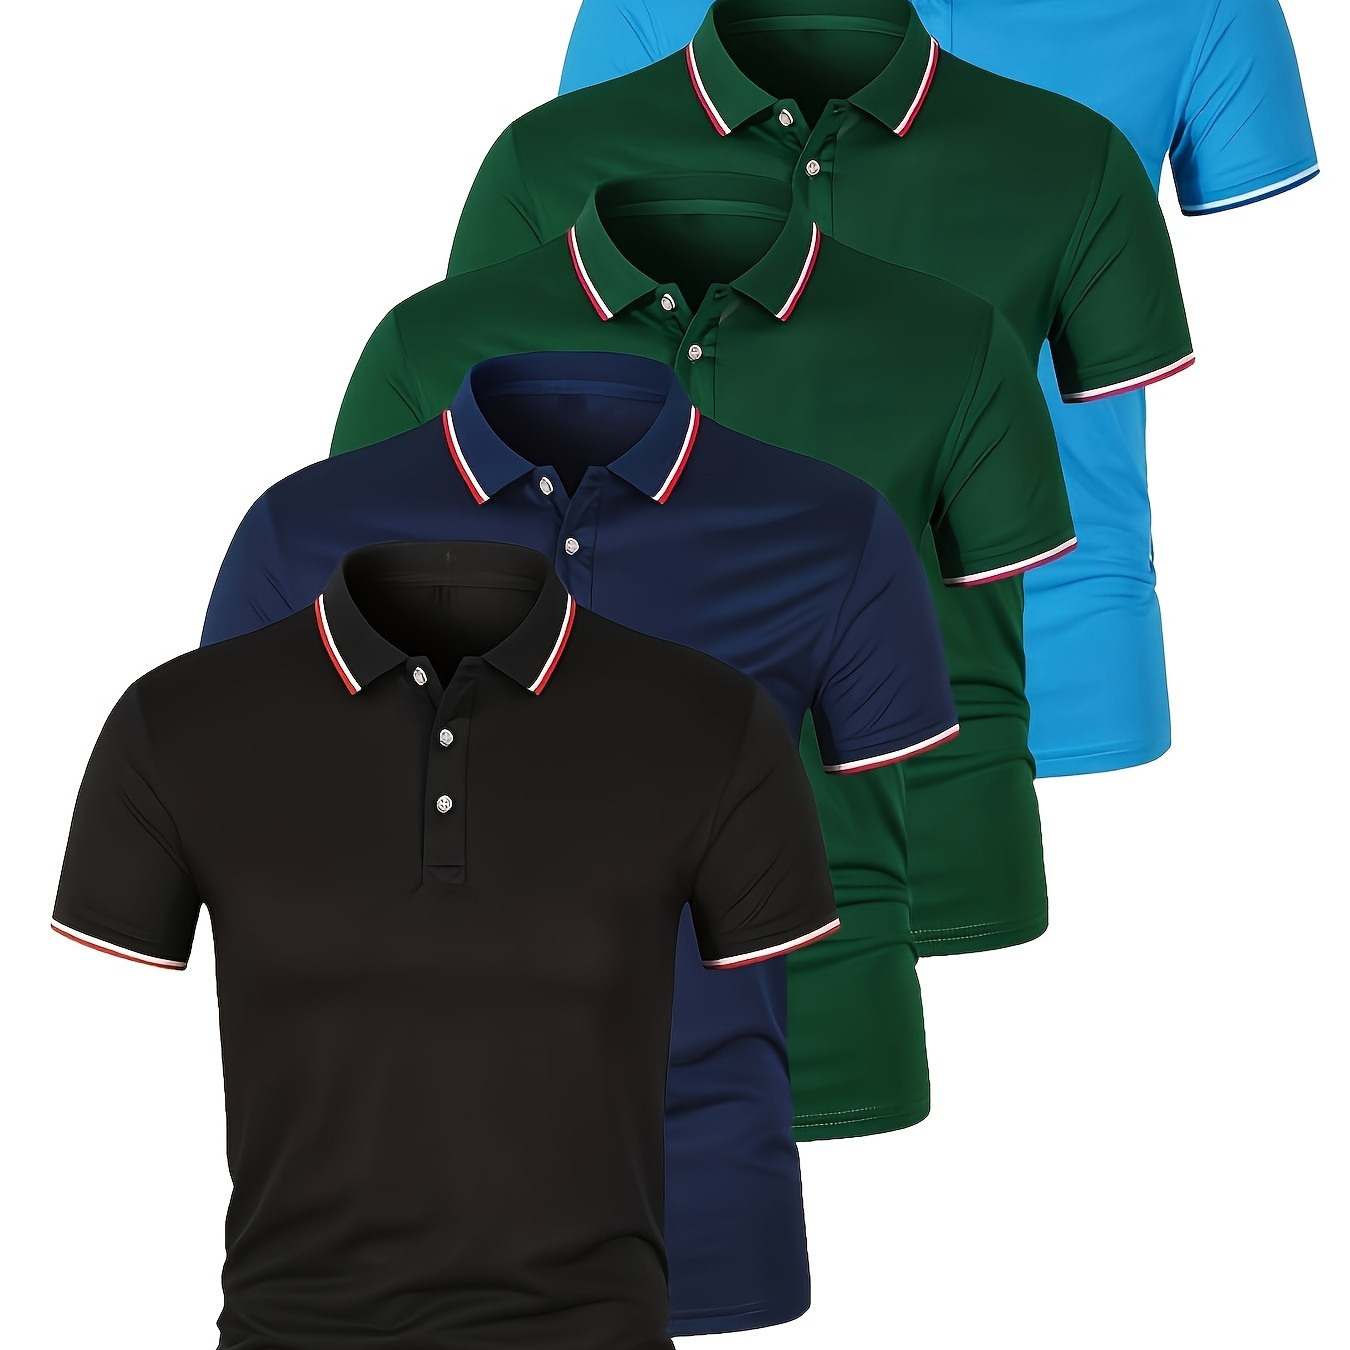 

5pcs Men's Summer Lapel Short Sleeve Golf Shirts With Solid Colors, Breathable Slight Stretchy Tops With Button Details, Regular Fit, Suitable For Business & Daily Workout